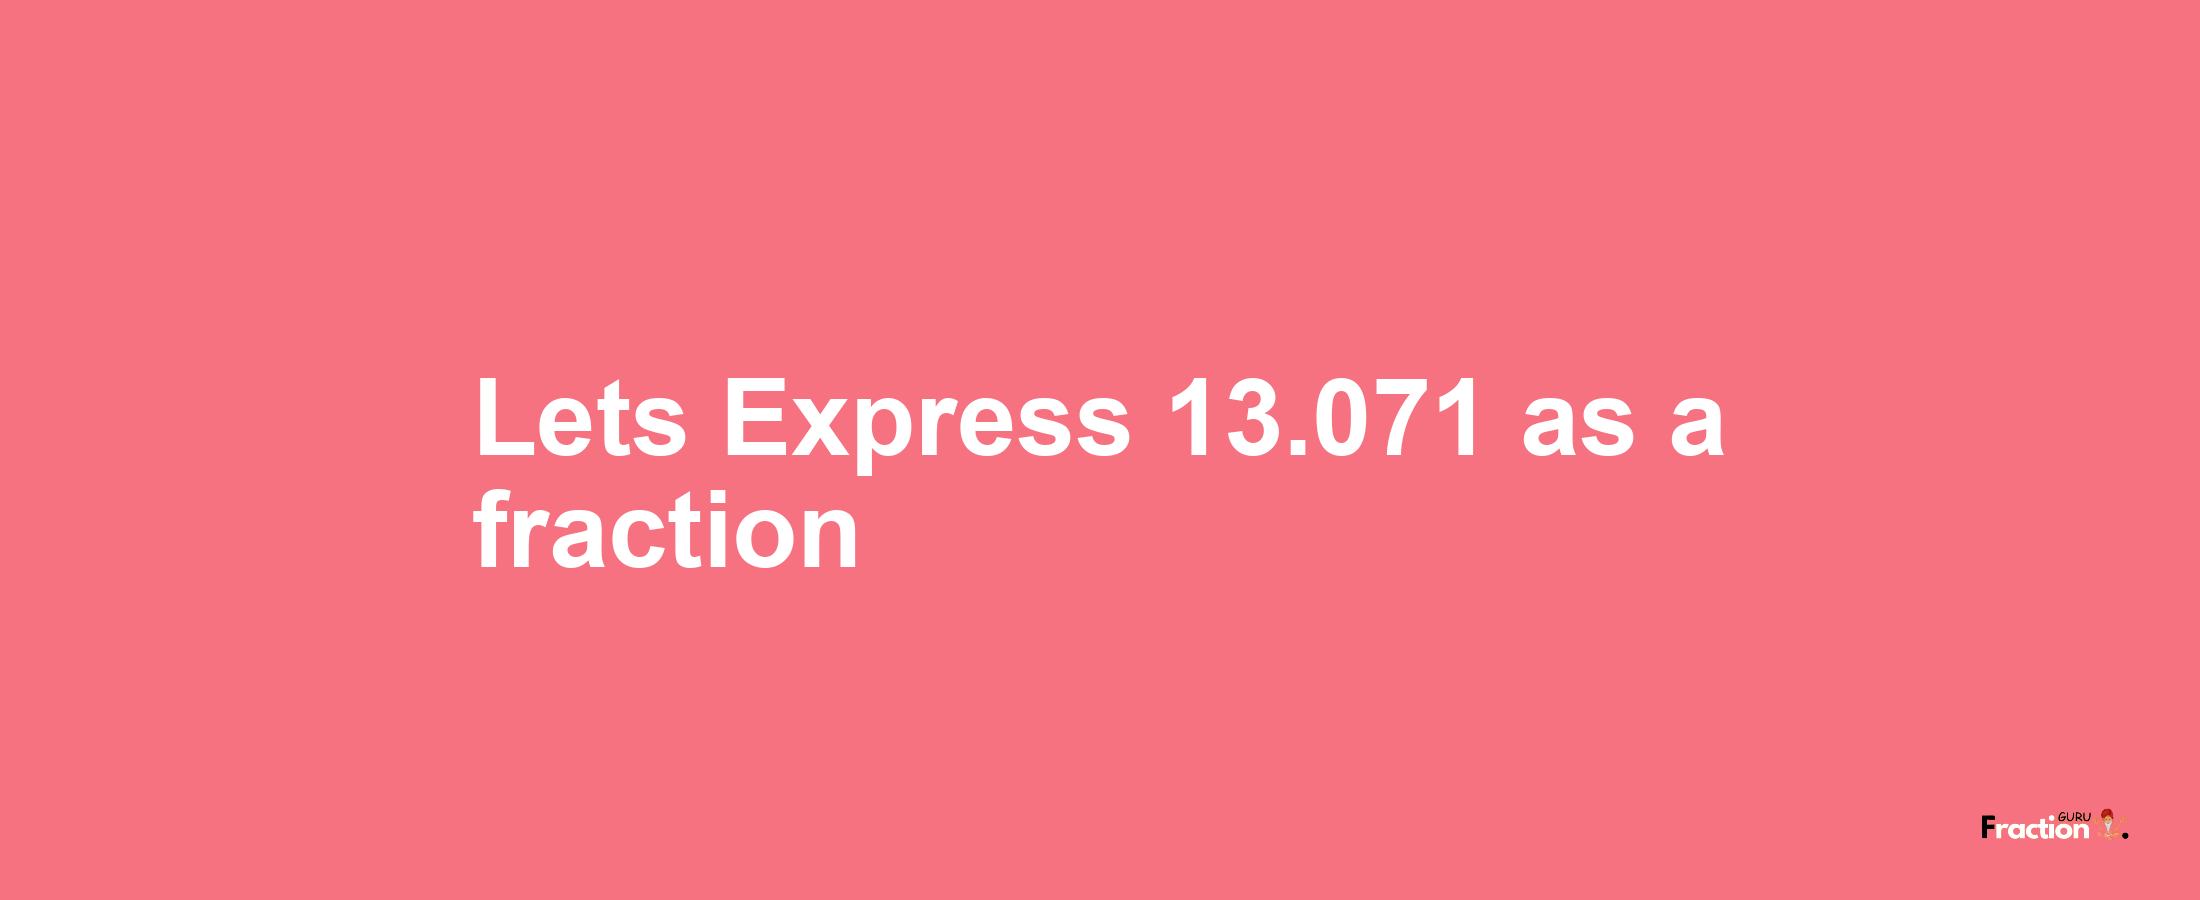 Lets Express 13.071 as afraction